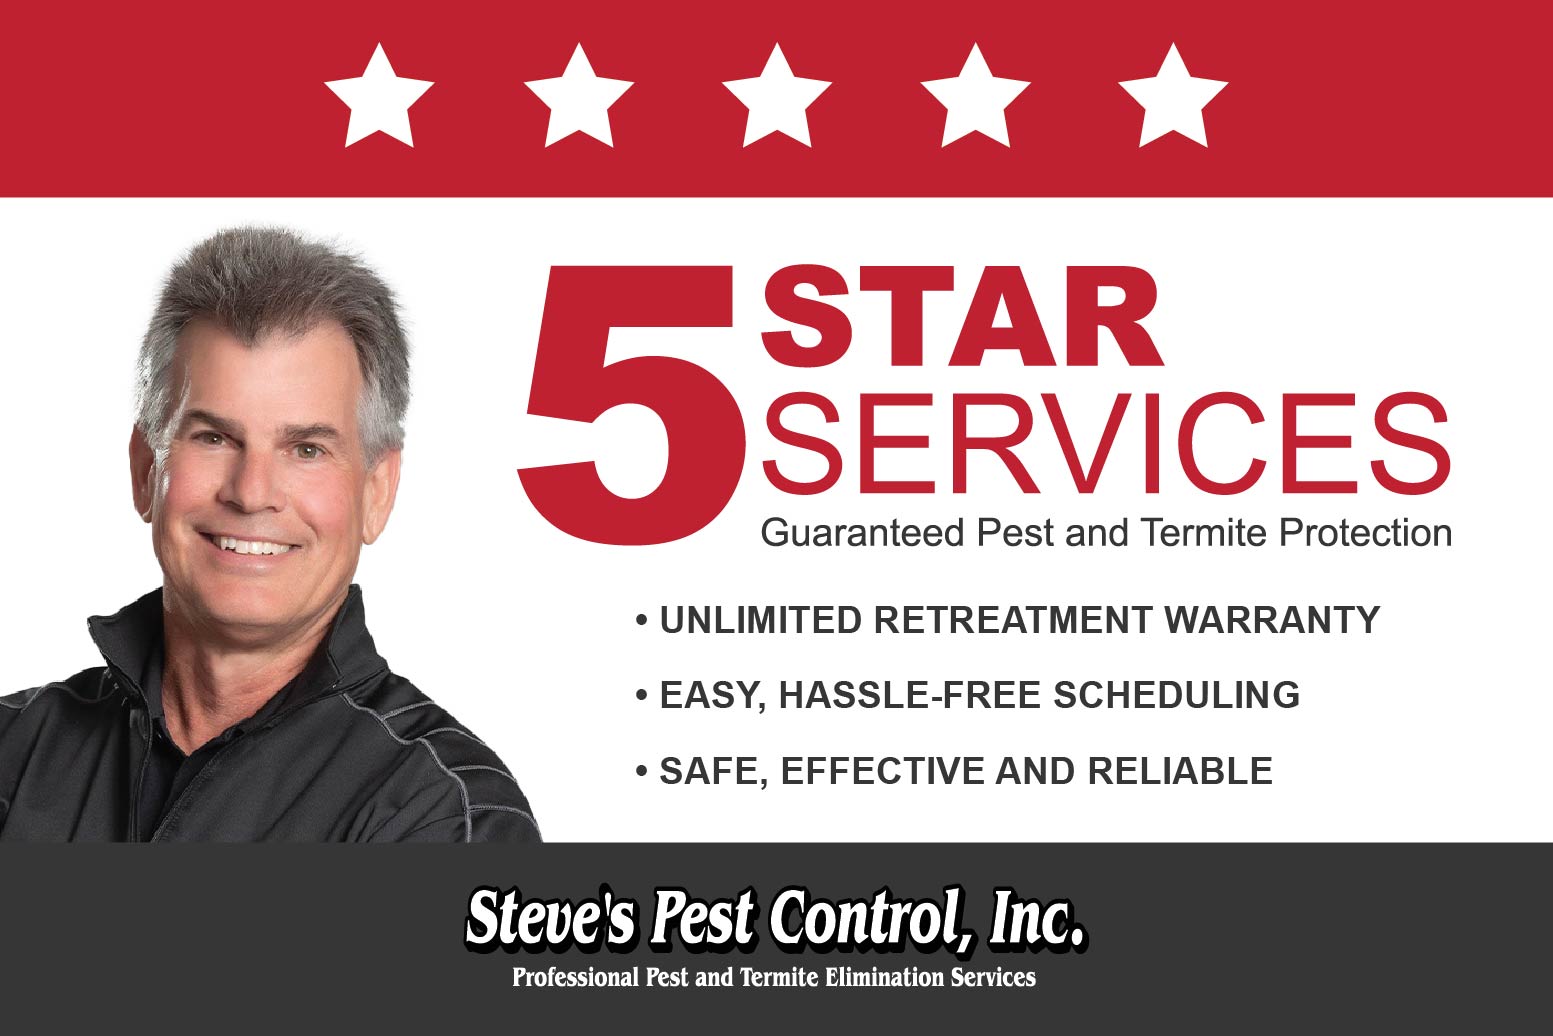 Call Steve's Pest Control in Mid-Missouri for 5 Star Pest Control Service